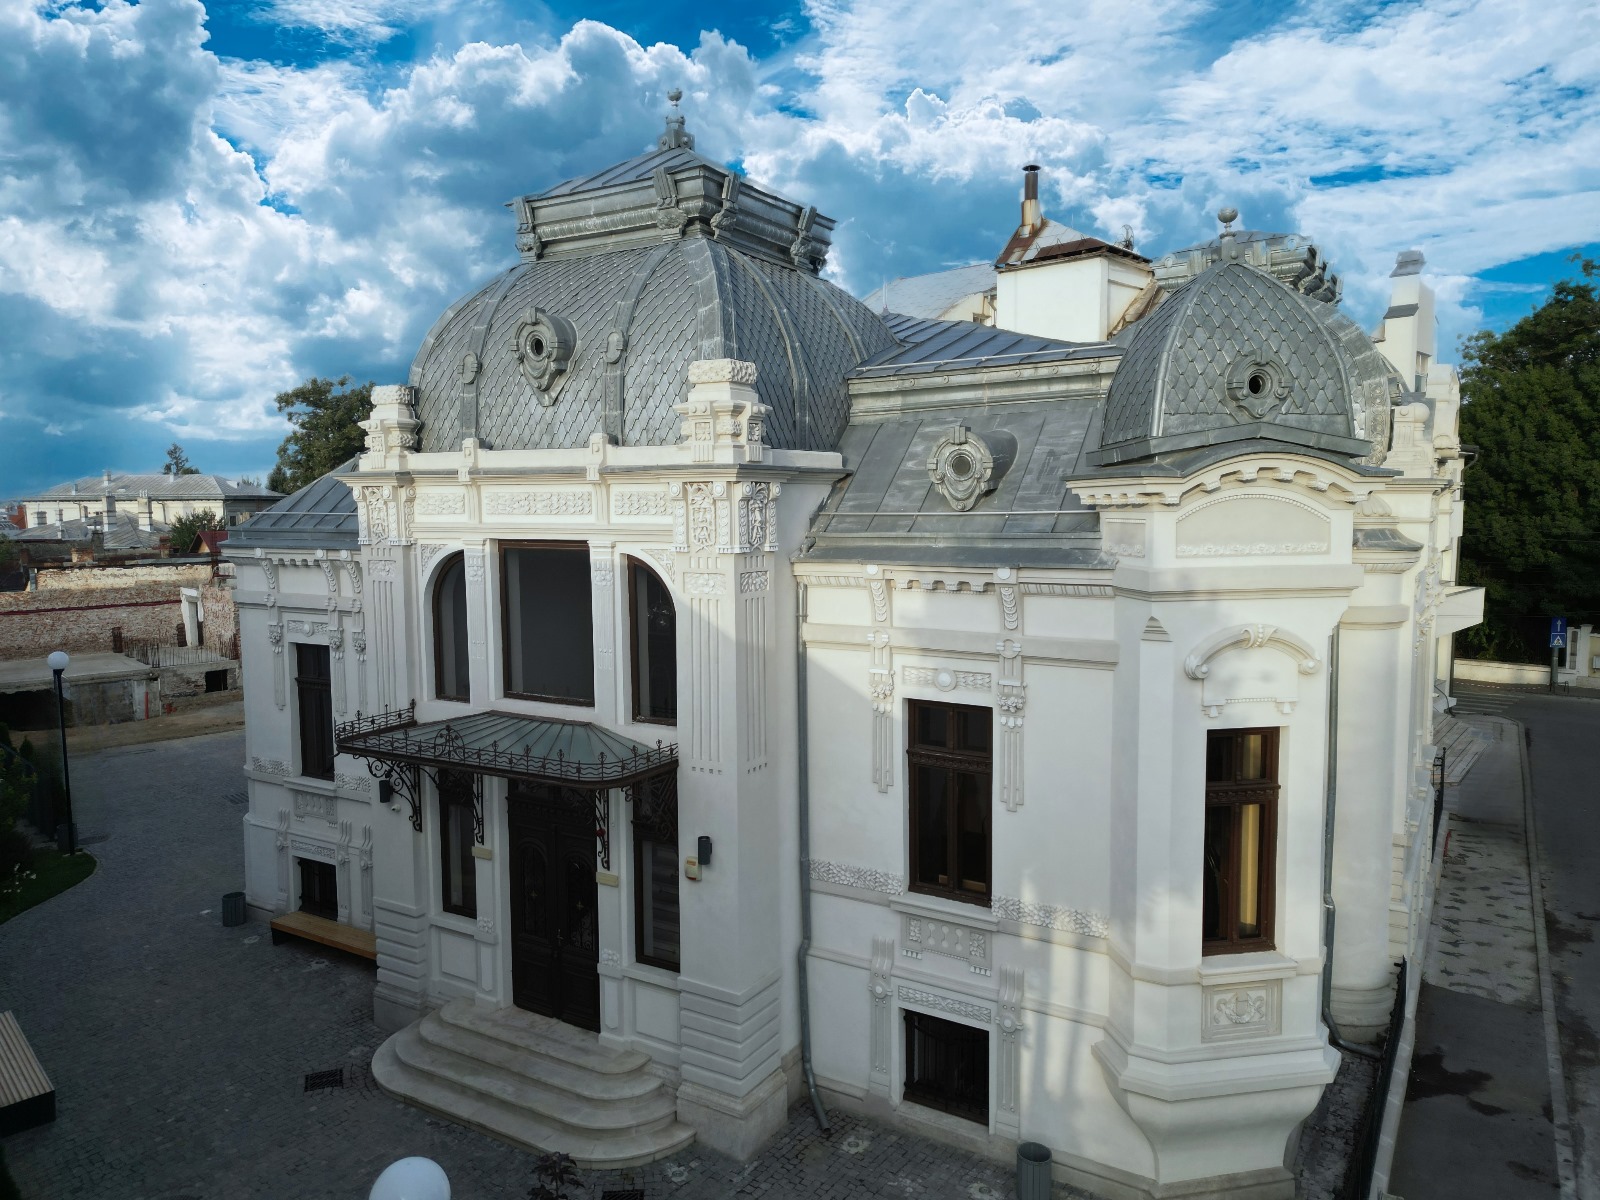 The Romanian Book and Exile Museum was inaugurated in Craiova